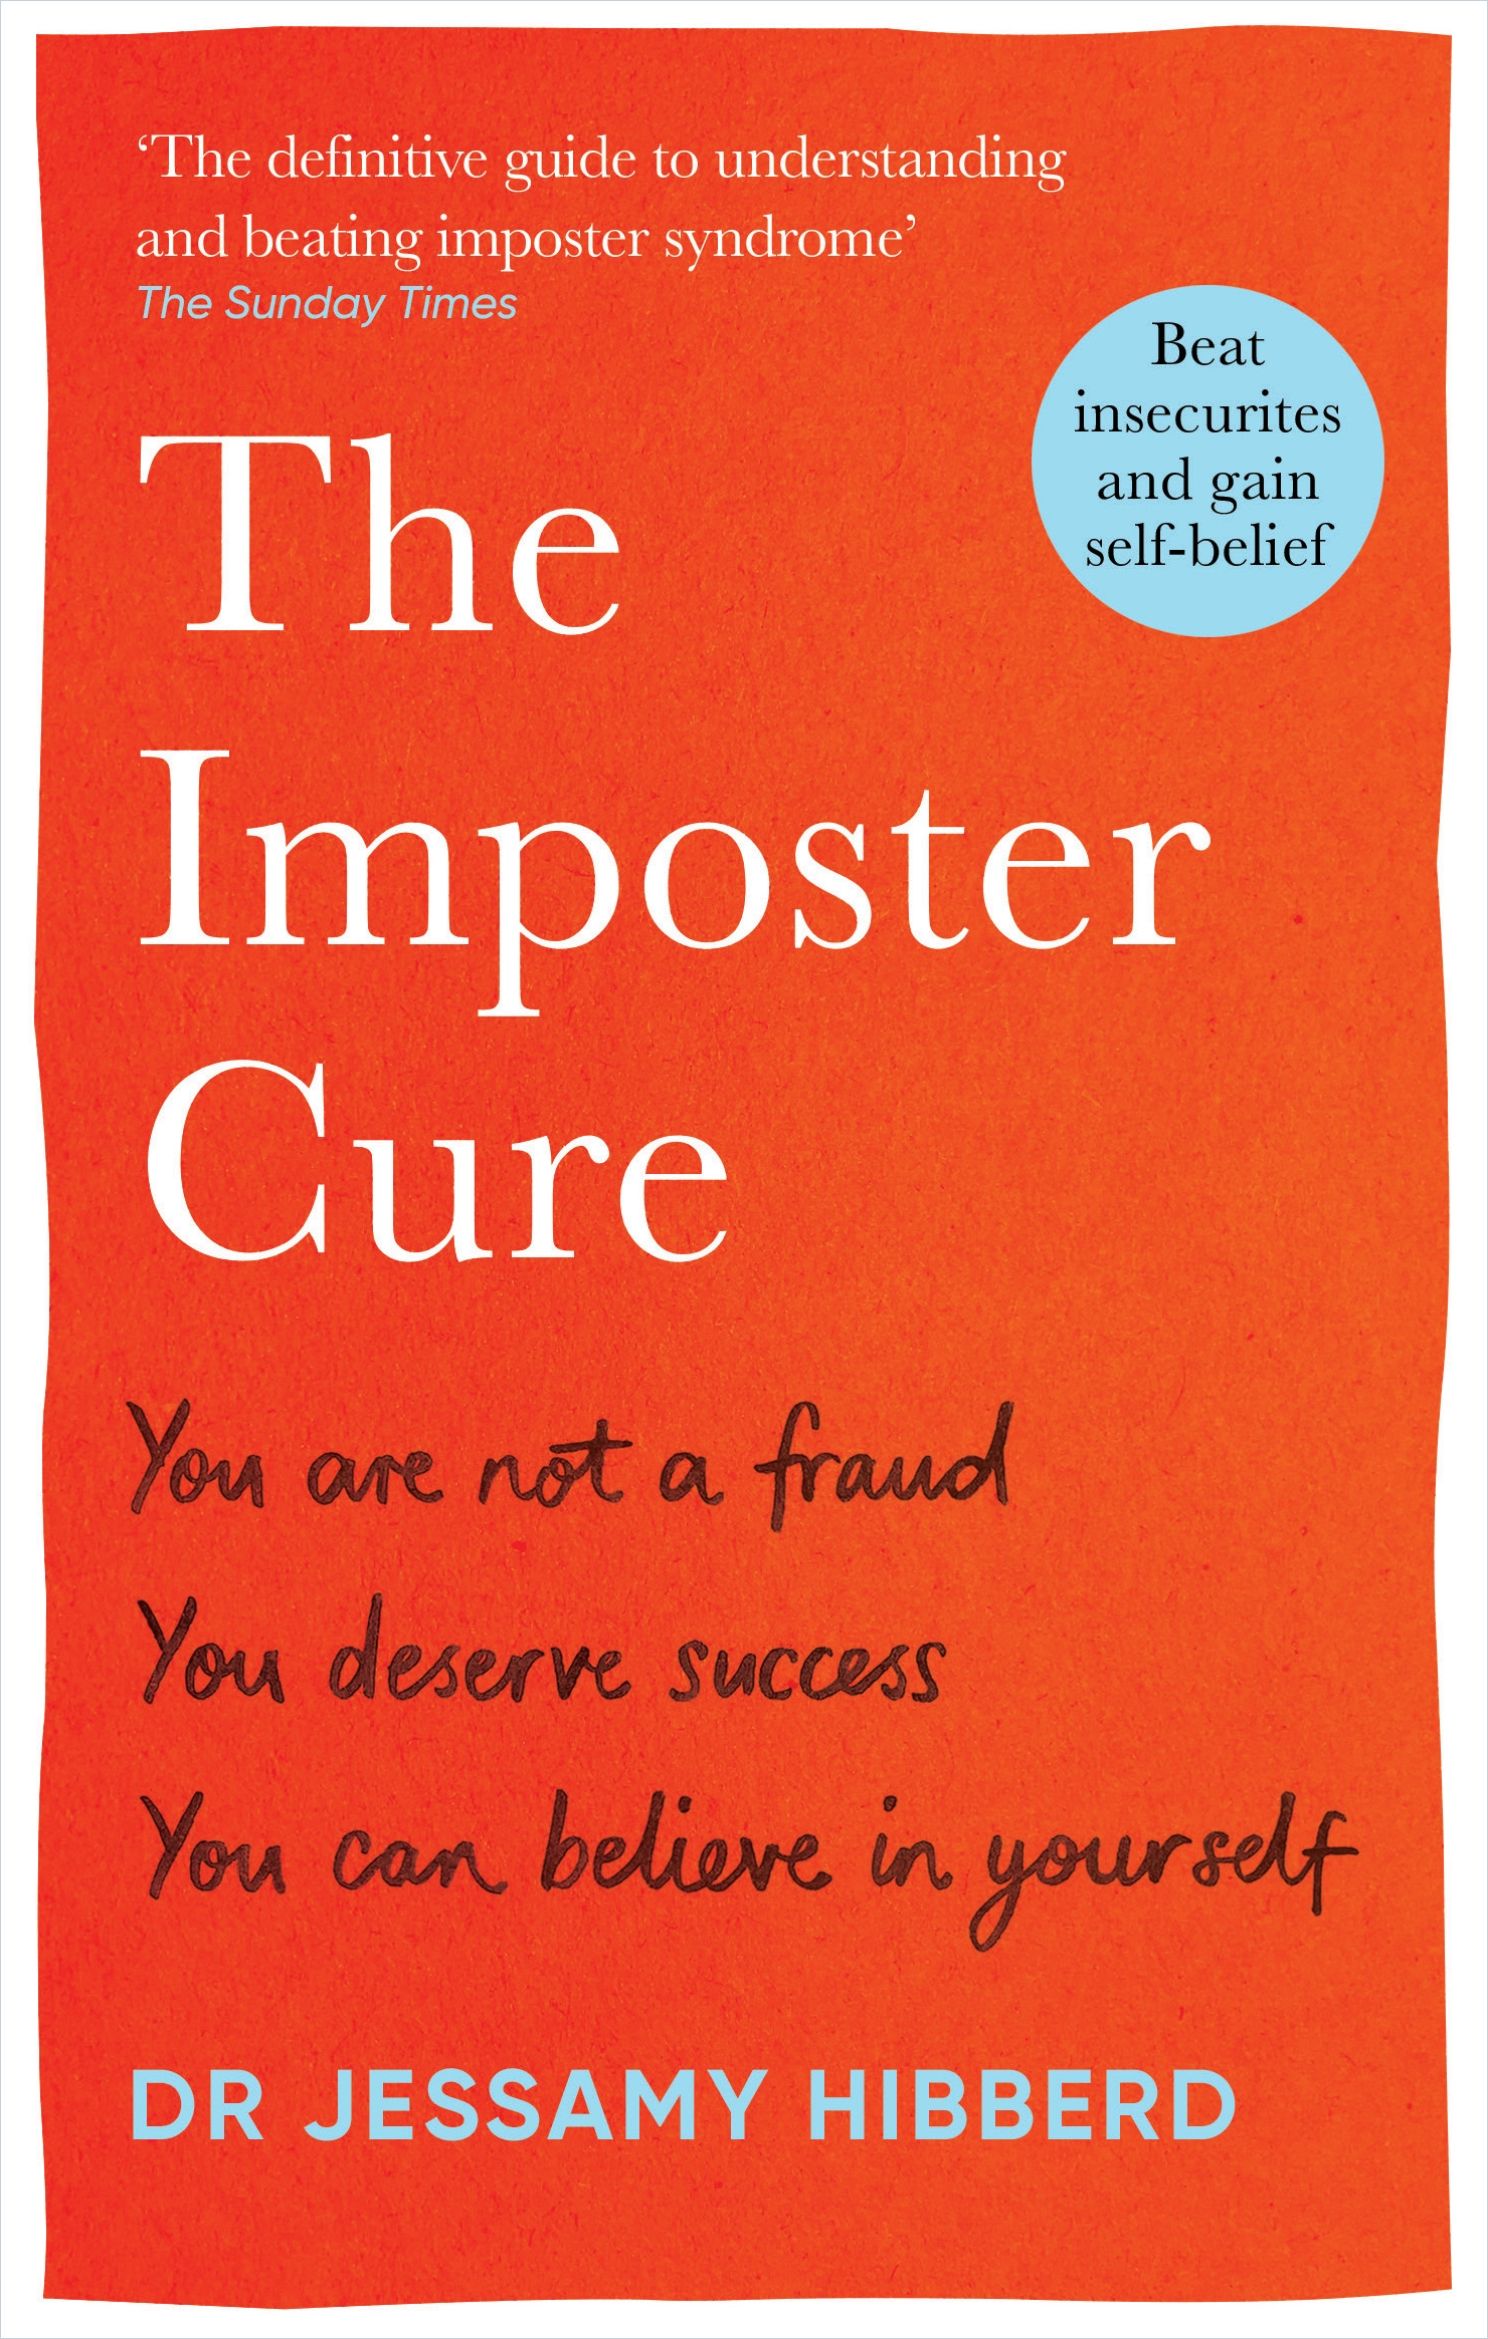 You can escape Imposter Syndrome